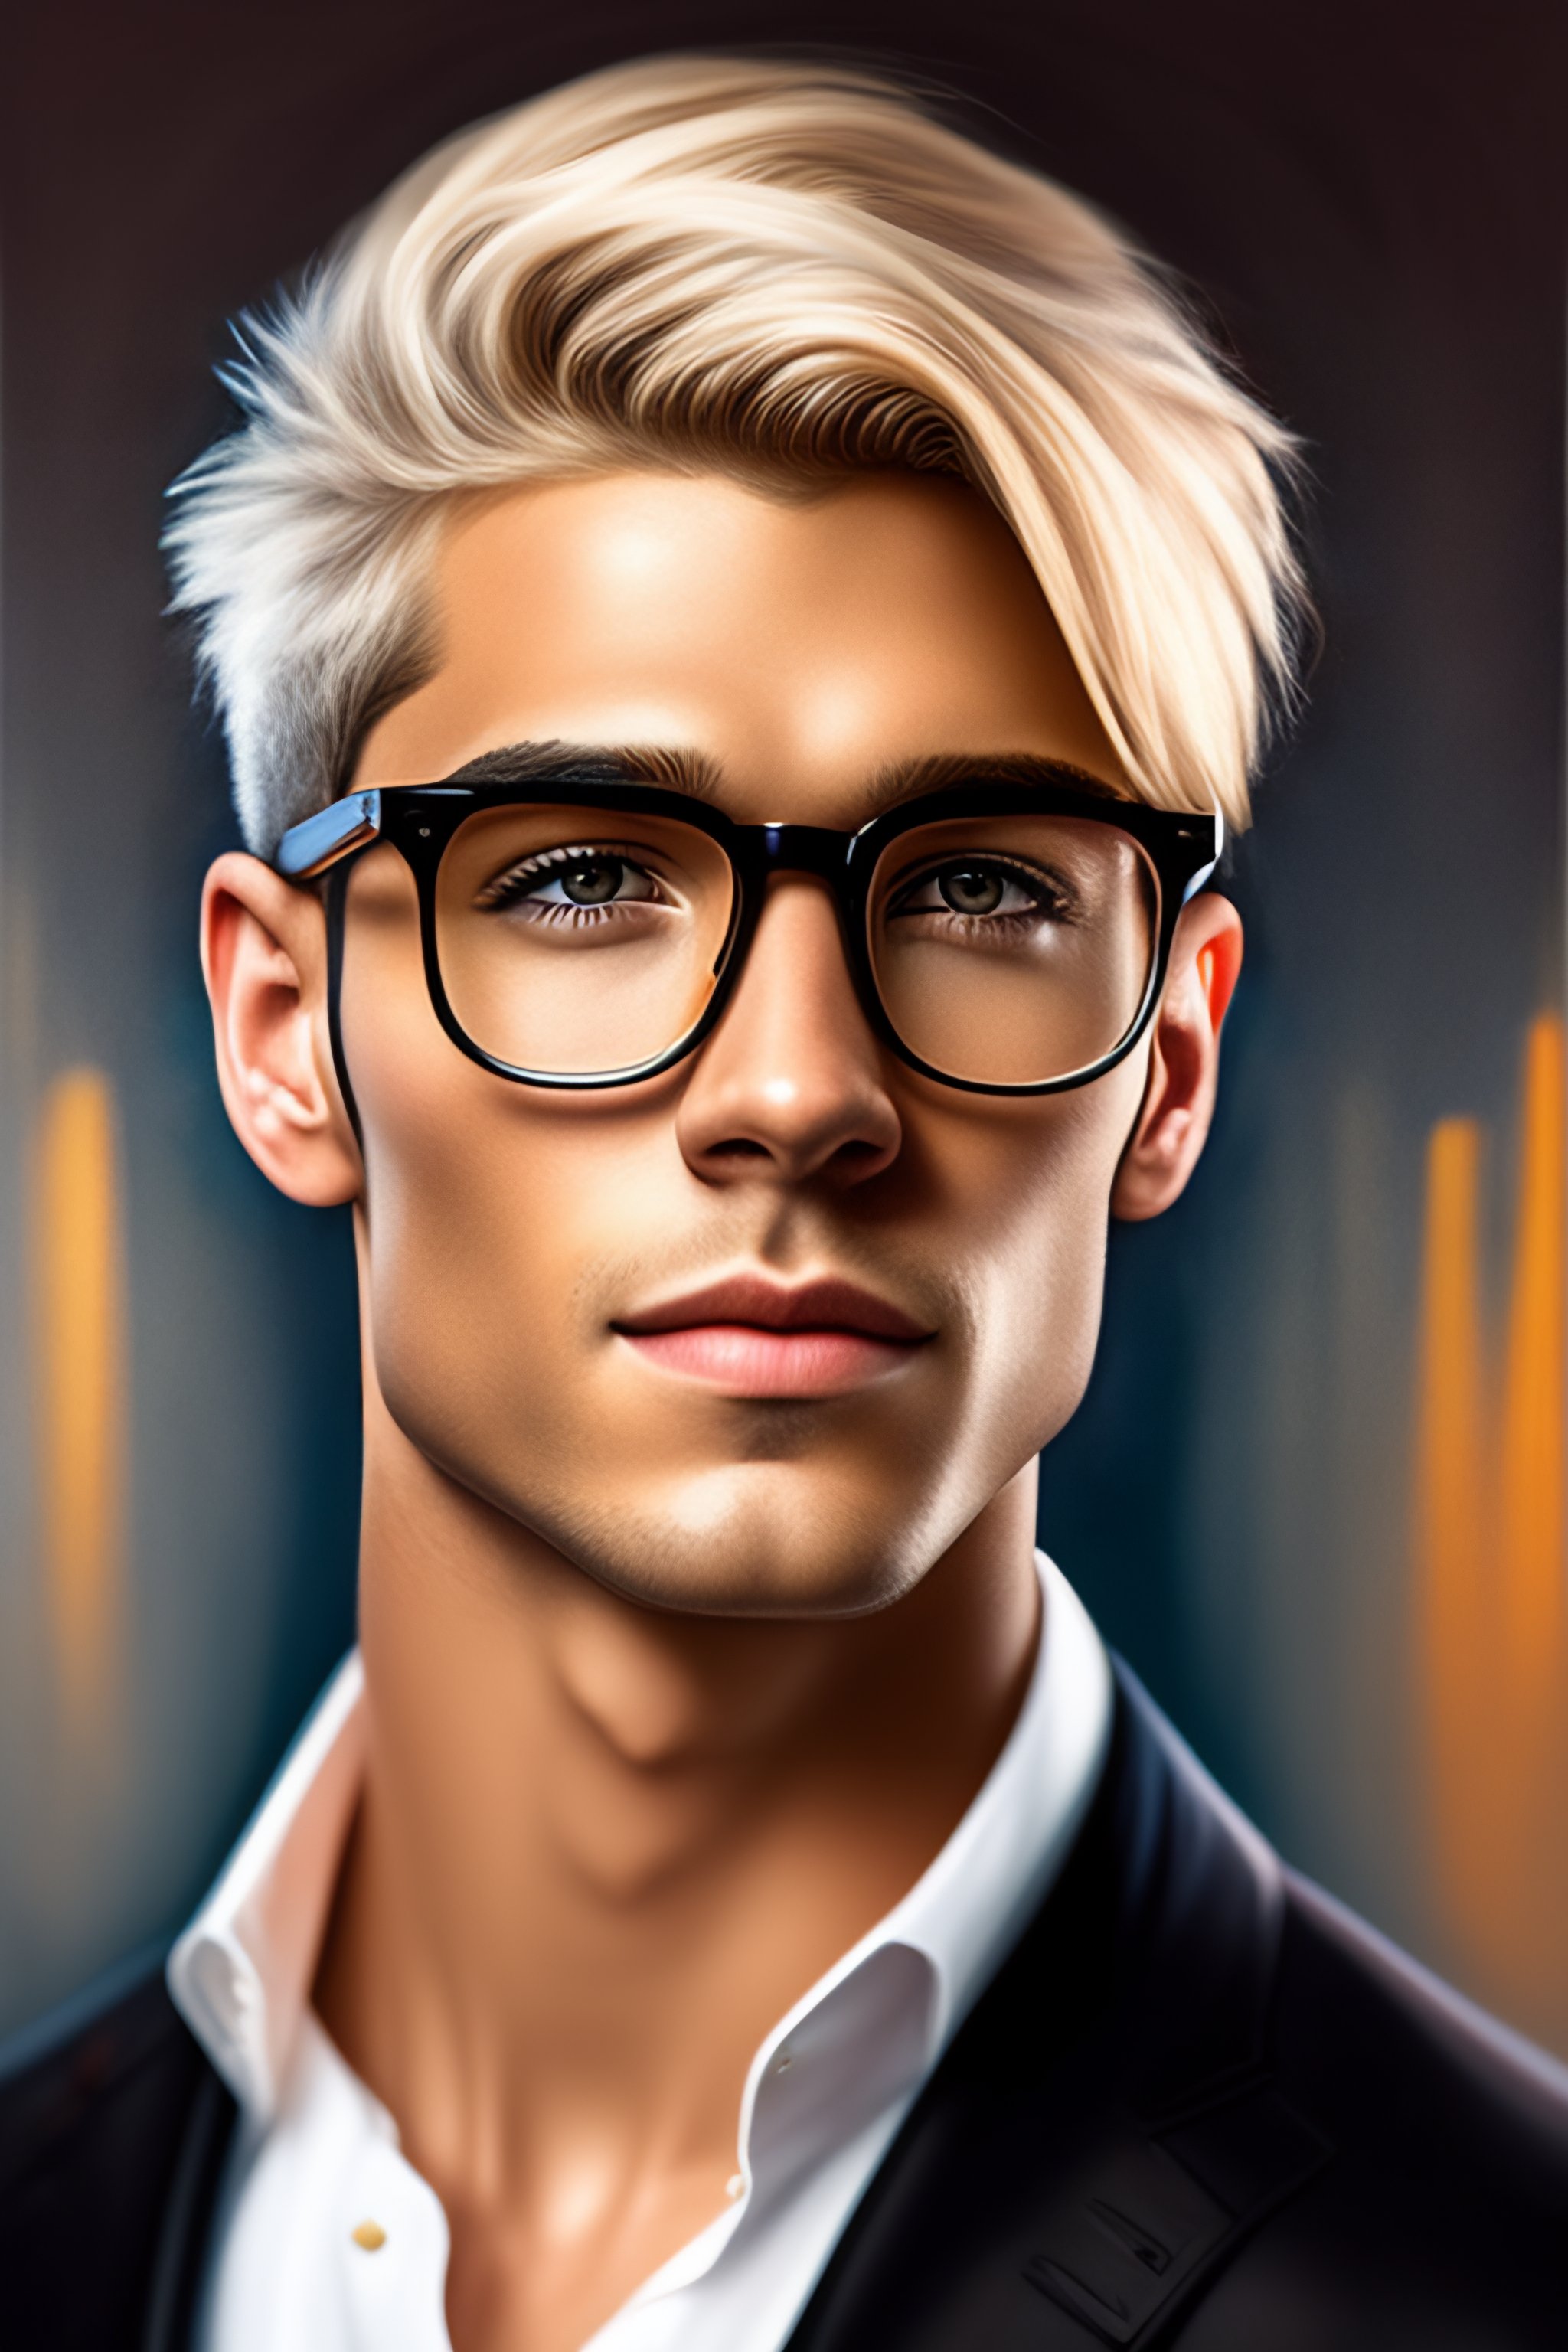 Lexica Portrait Of A Blonde Male Short Hair Samuray With Glasses Art Station